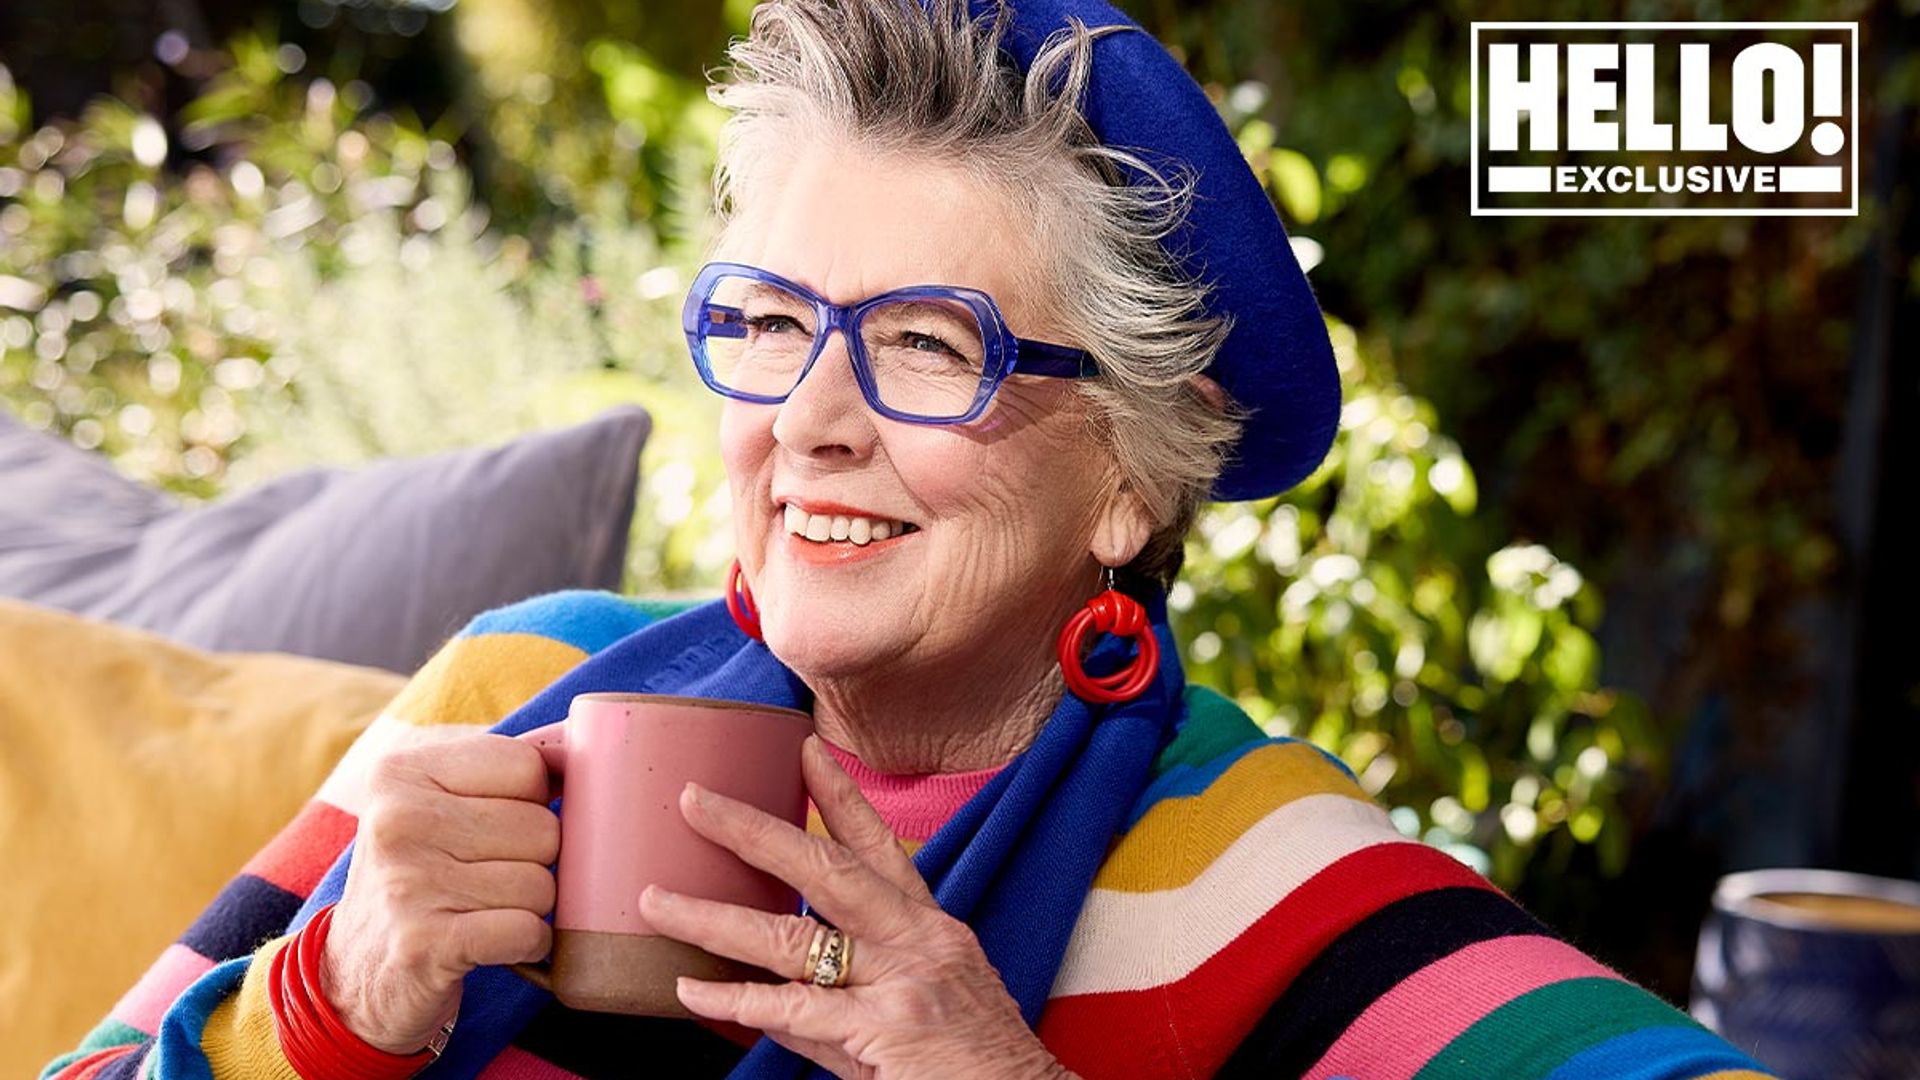 Exclusive: Prue Leith details family's holiday traditions, falling in love and Paul Hollywood friendship